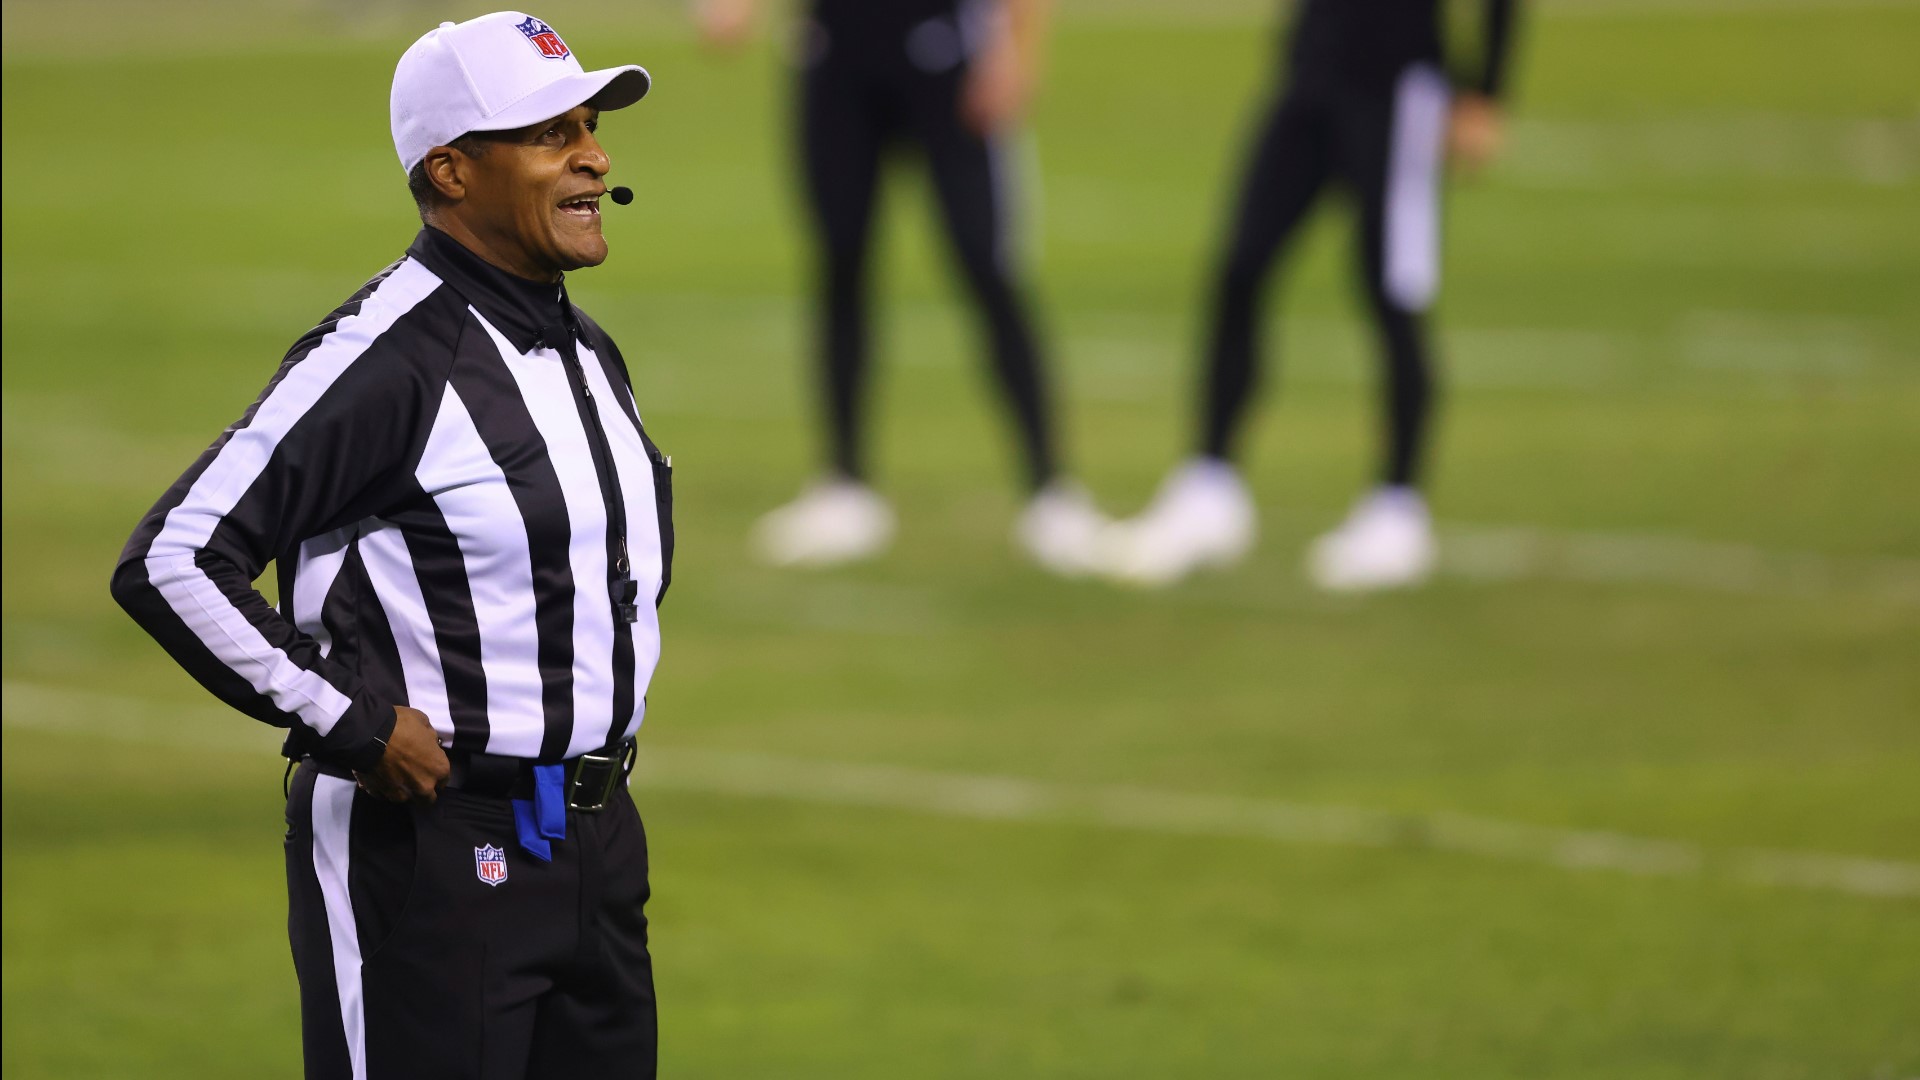 Tra and Jerome Boger to become the first African American father/son duo to officiate an NFL game together.